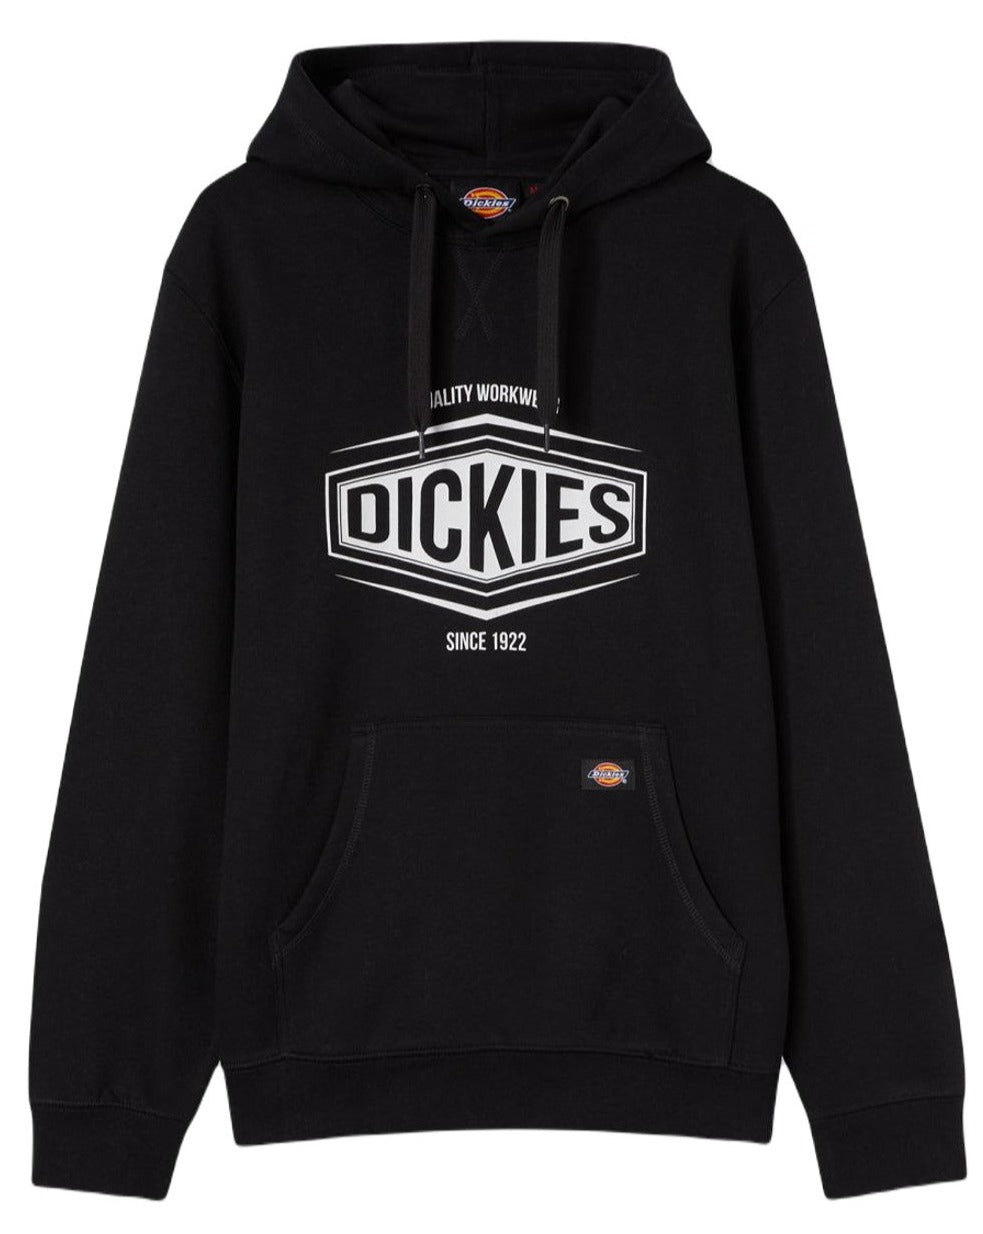 Dickies Workwear | The Clothing Brand Reliable for Go-To